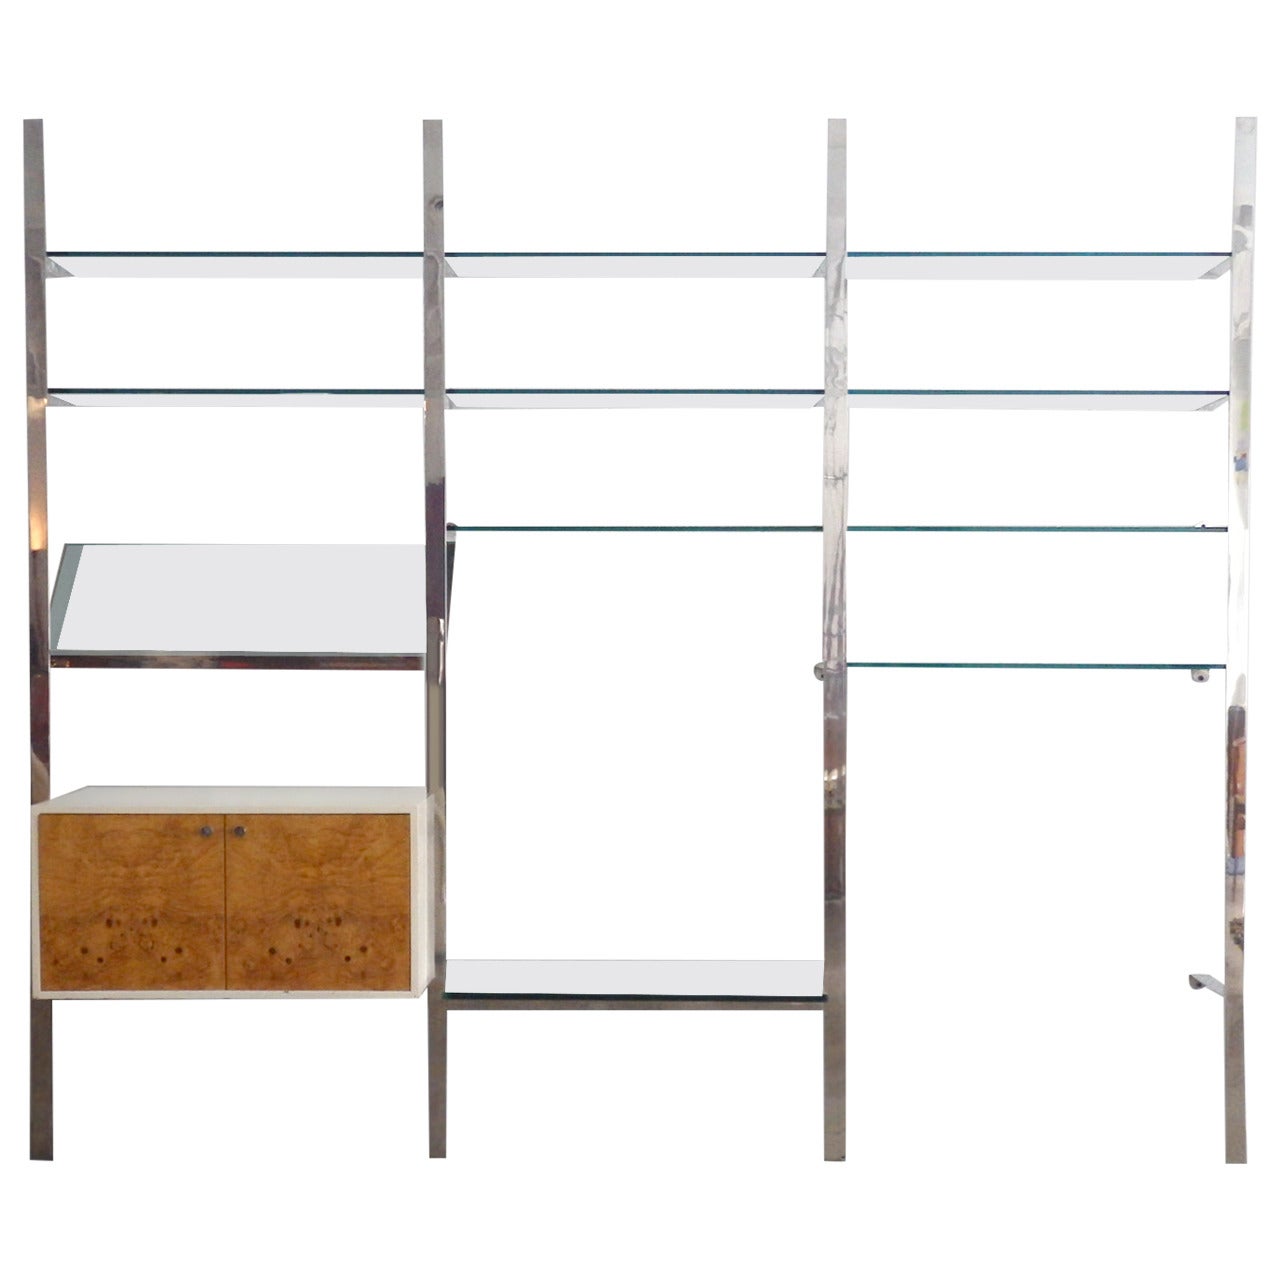 Pace collection wall mounted shelf unit . Two white lacquered cabinets with blonde burl wood doors anchor nine 12